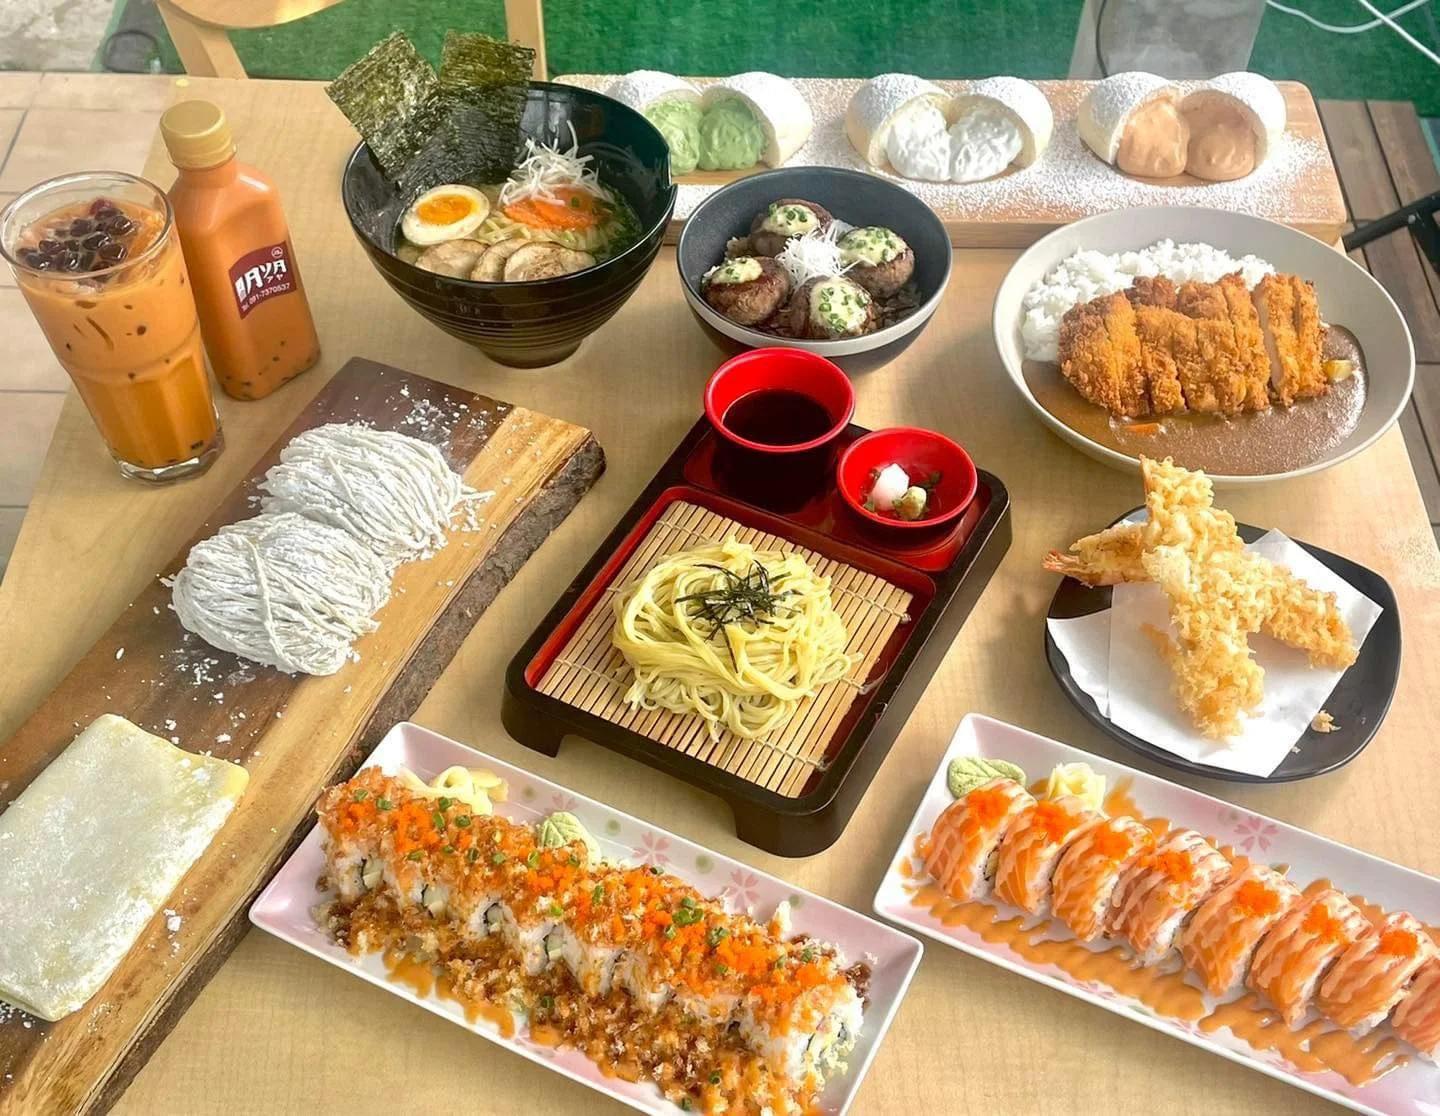 Halal Japanese food found in Thailand